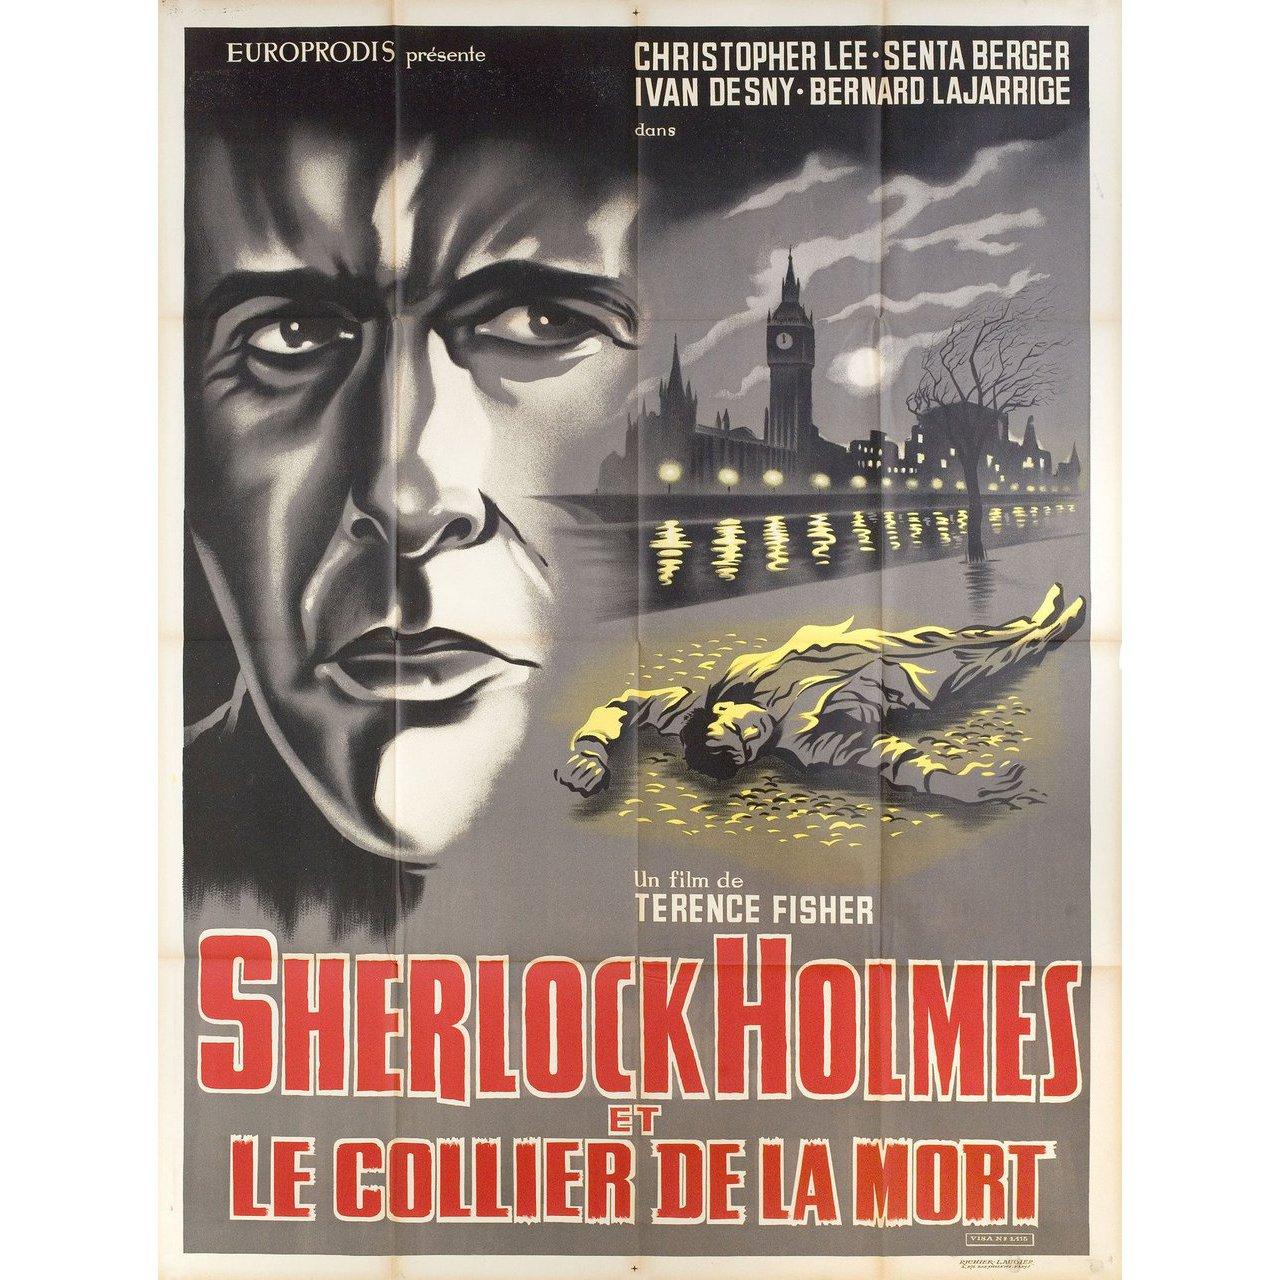 Original 1962 French grande poster for the film Sherlock Holmes and the Deadly Necklace (Sherlock Holmes und das Halsband des Todes) directed by Terence Fisher with Christopher Lee / Hans Sohnker / Hans Nielsen / Senta Berger. Very good-fine